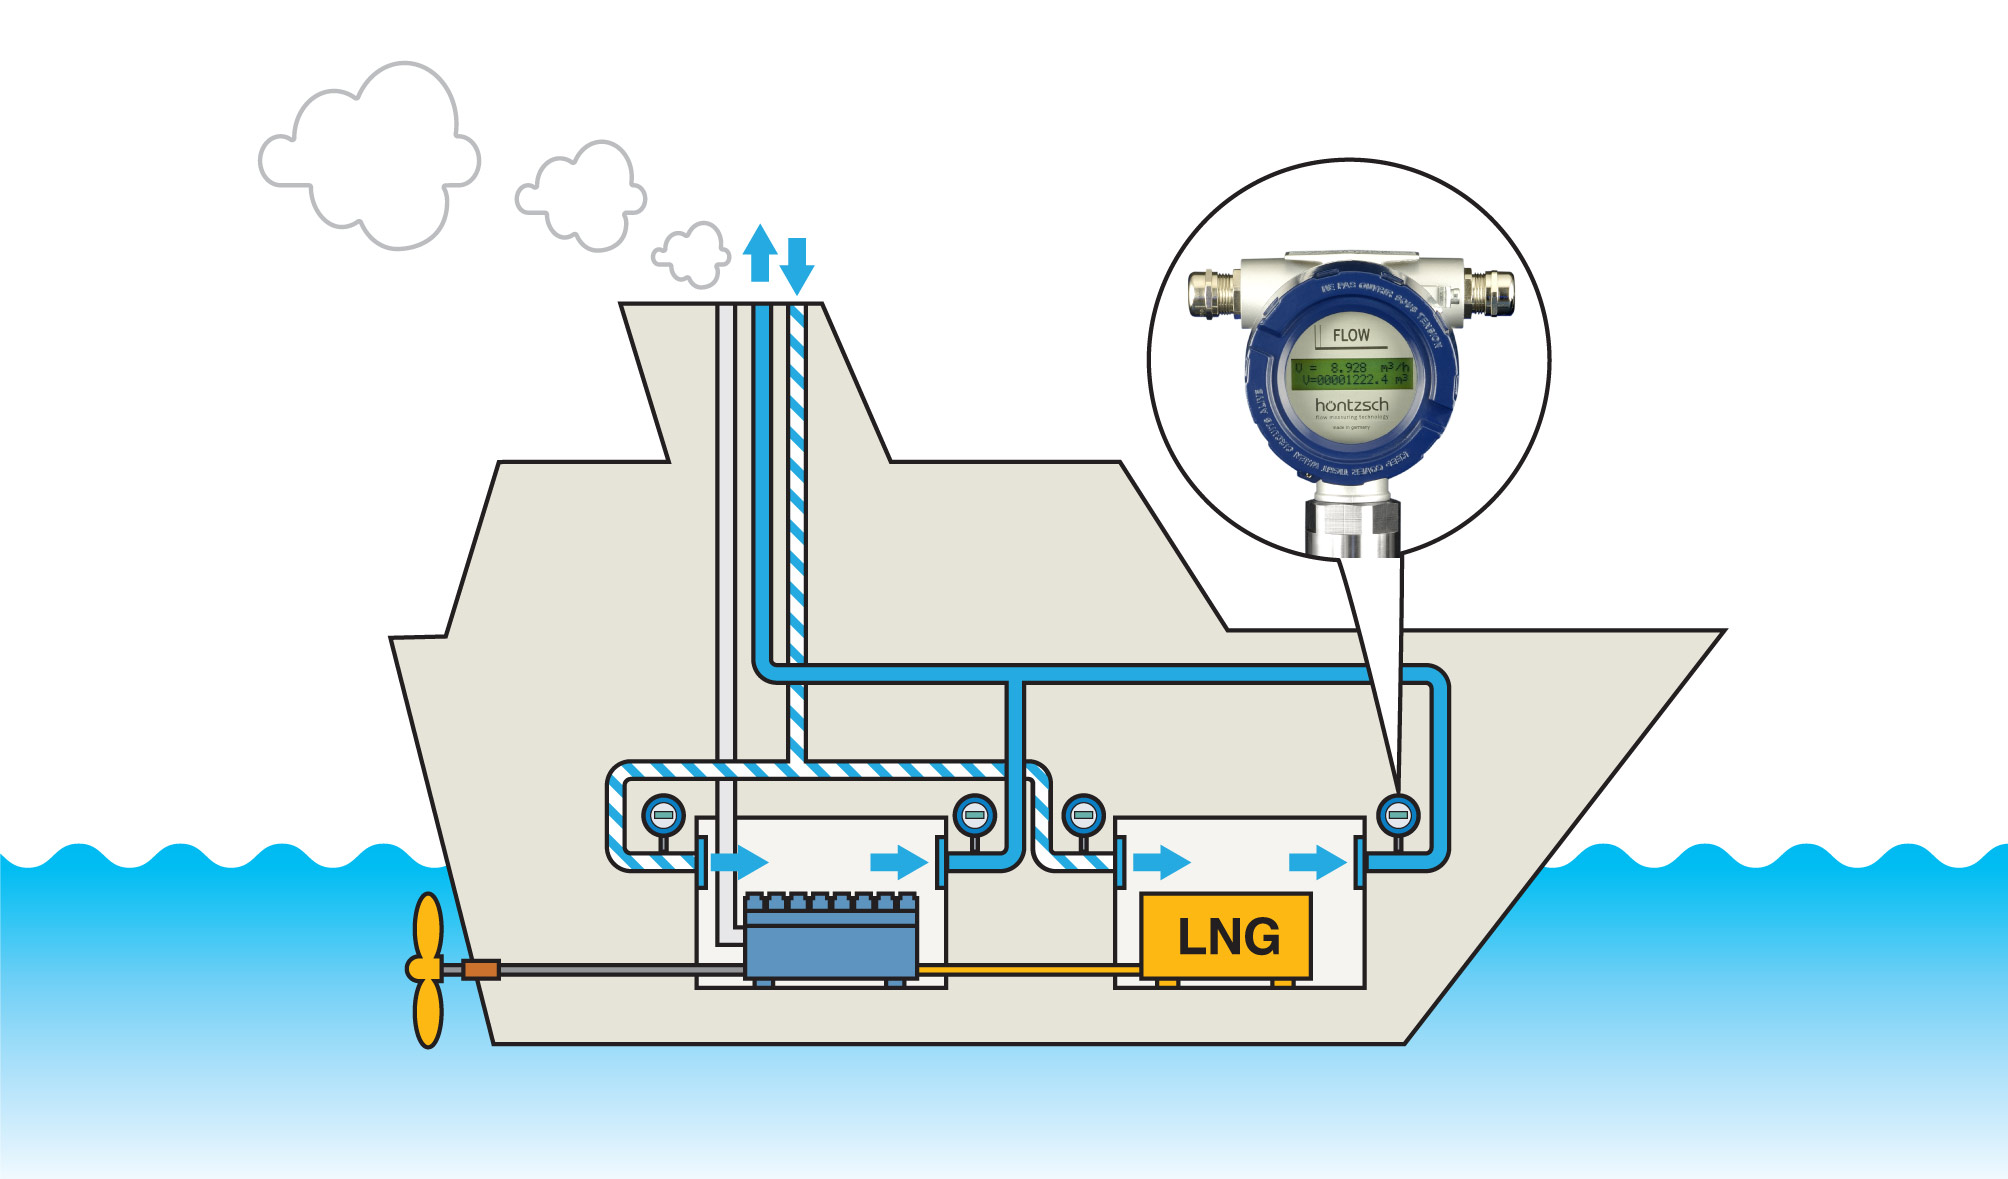 Monitoring ventilation in engine rooms of LNG ships, Hoentzsch Flow